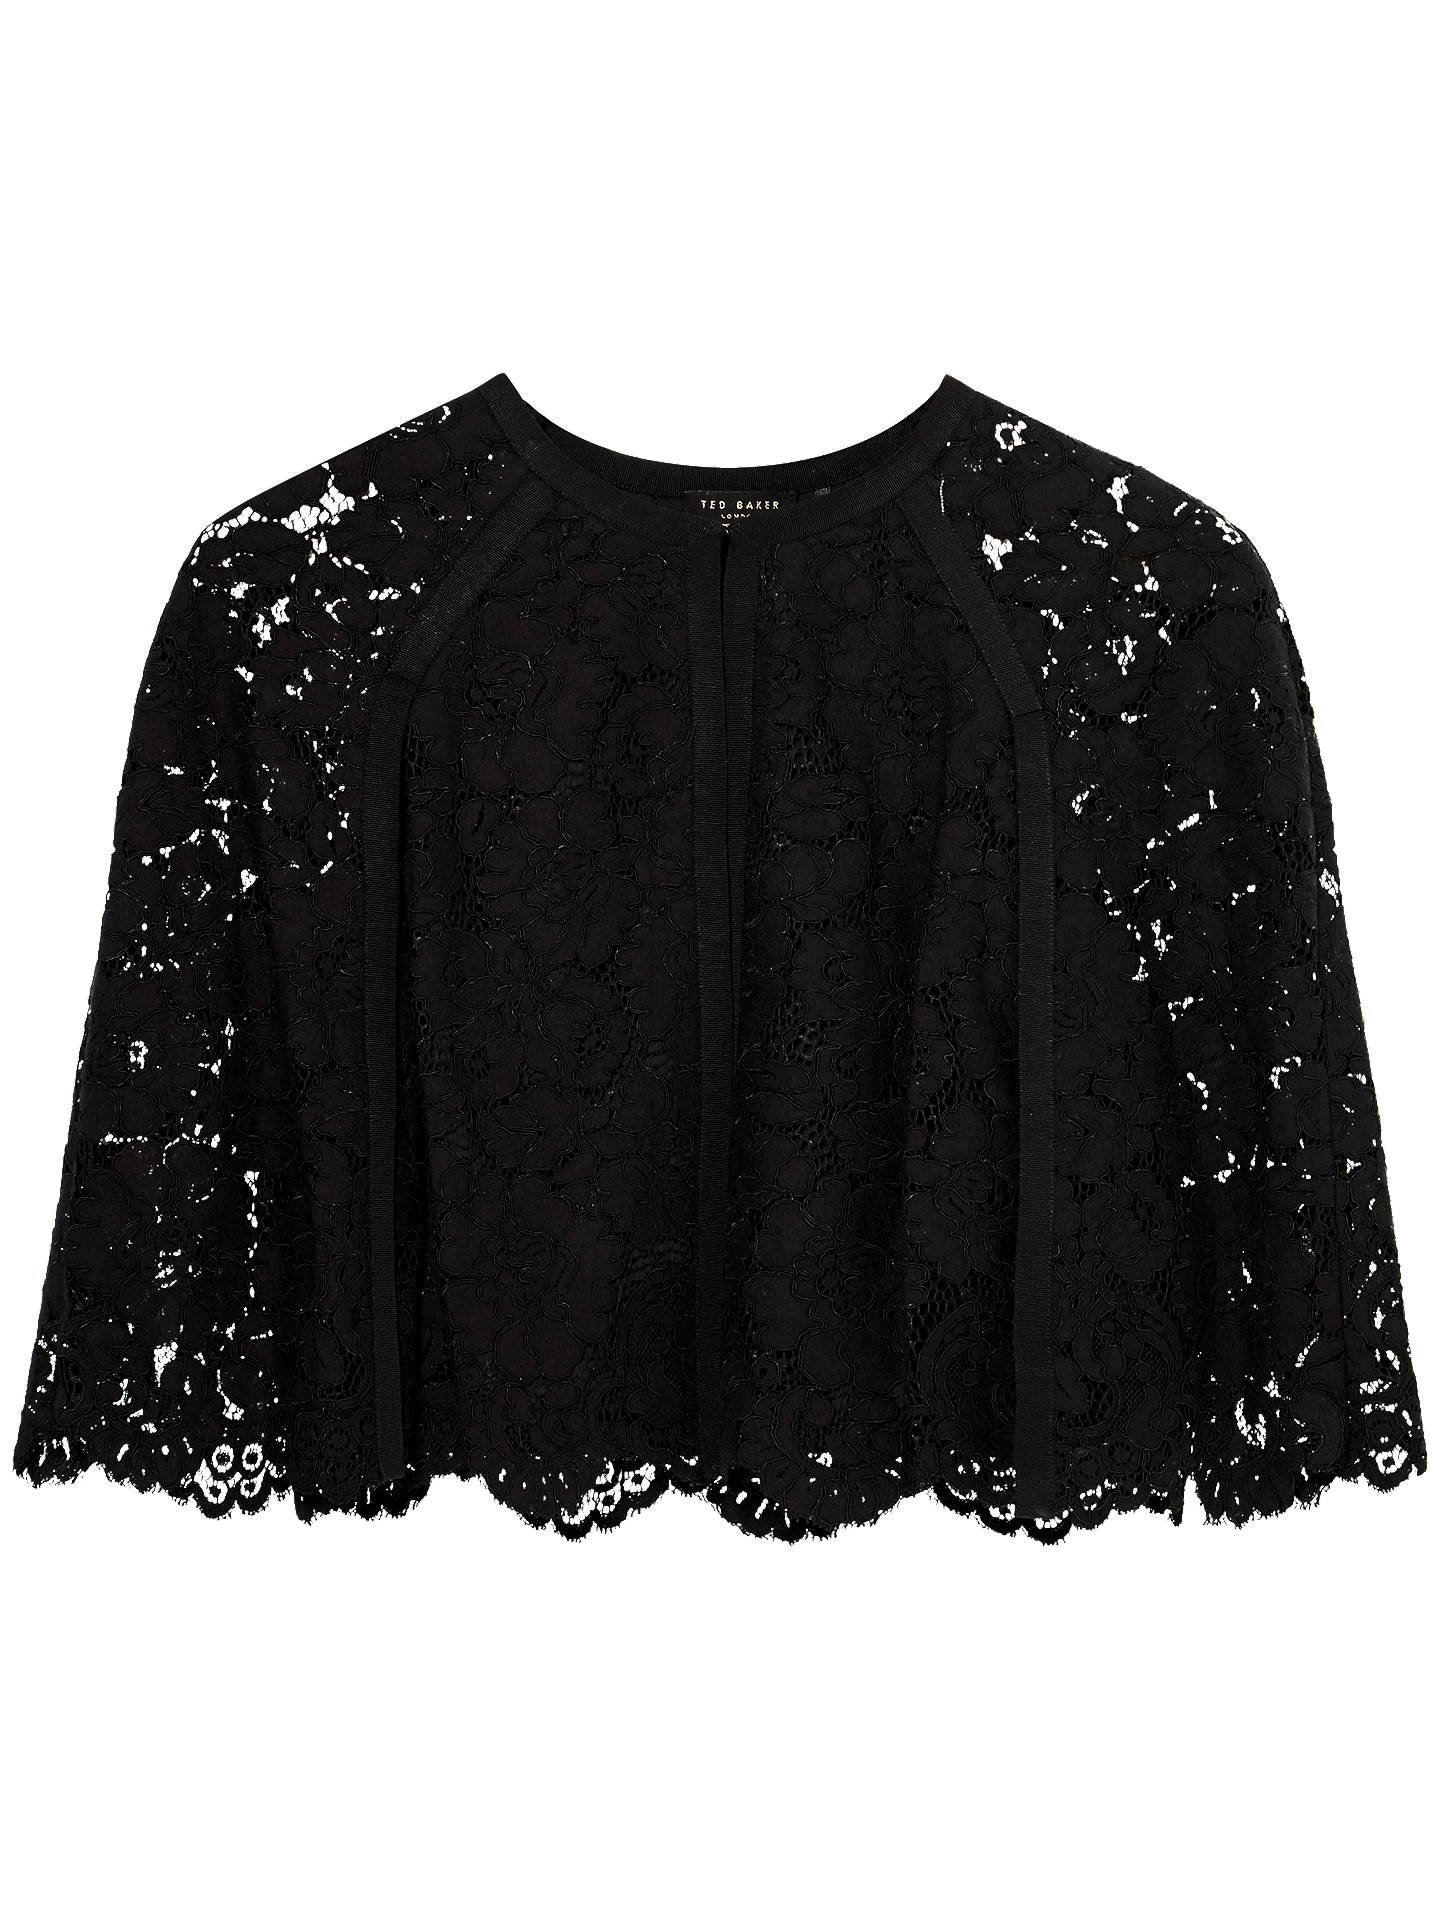 Ted Baker Scalloped Lace Cape in Black.jpg